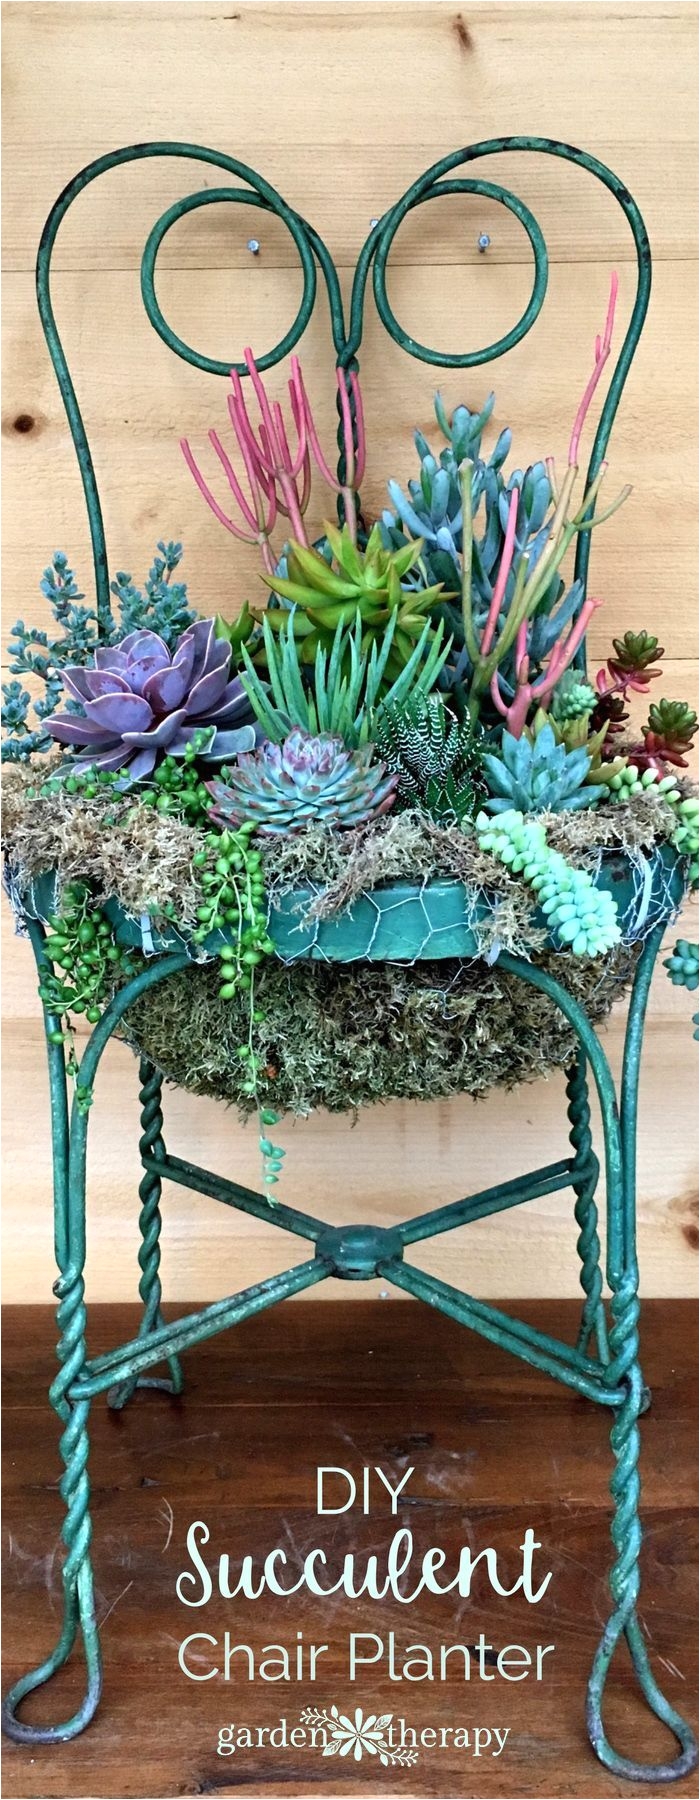 see how to upcycle an old chair into a beautiful piece of garden art for any size garden a succulent chair planter